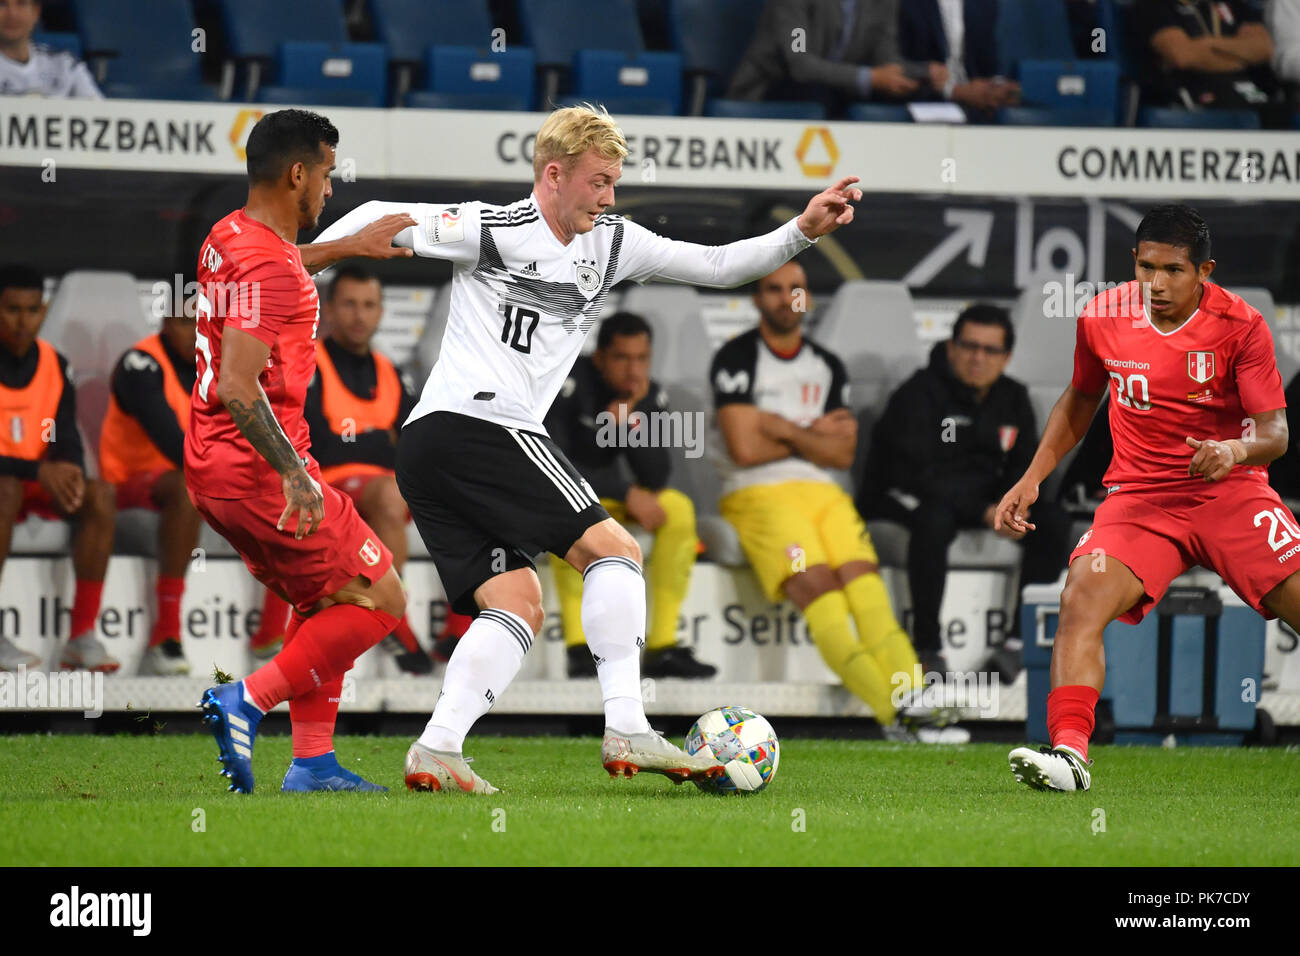 Julian BRANDT (GER), action, duels versus Miguel TRAUCO (PER), re: Edison FLORES (PER). Soccer Laenderspiel, Germany (GER) -Peru (PER) 2-1 on 09/09/2018 in Sinsheim/Wirsol Rhein-Neckar-Arena. DFB REGULATIONS PROHIBIT ANY USE OF PHOTOGRAPH AS IMAGE SEQUENCES AND/OR QUASI VIDEO. | usage worldwide Stock Photo